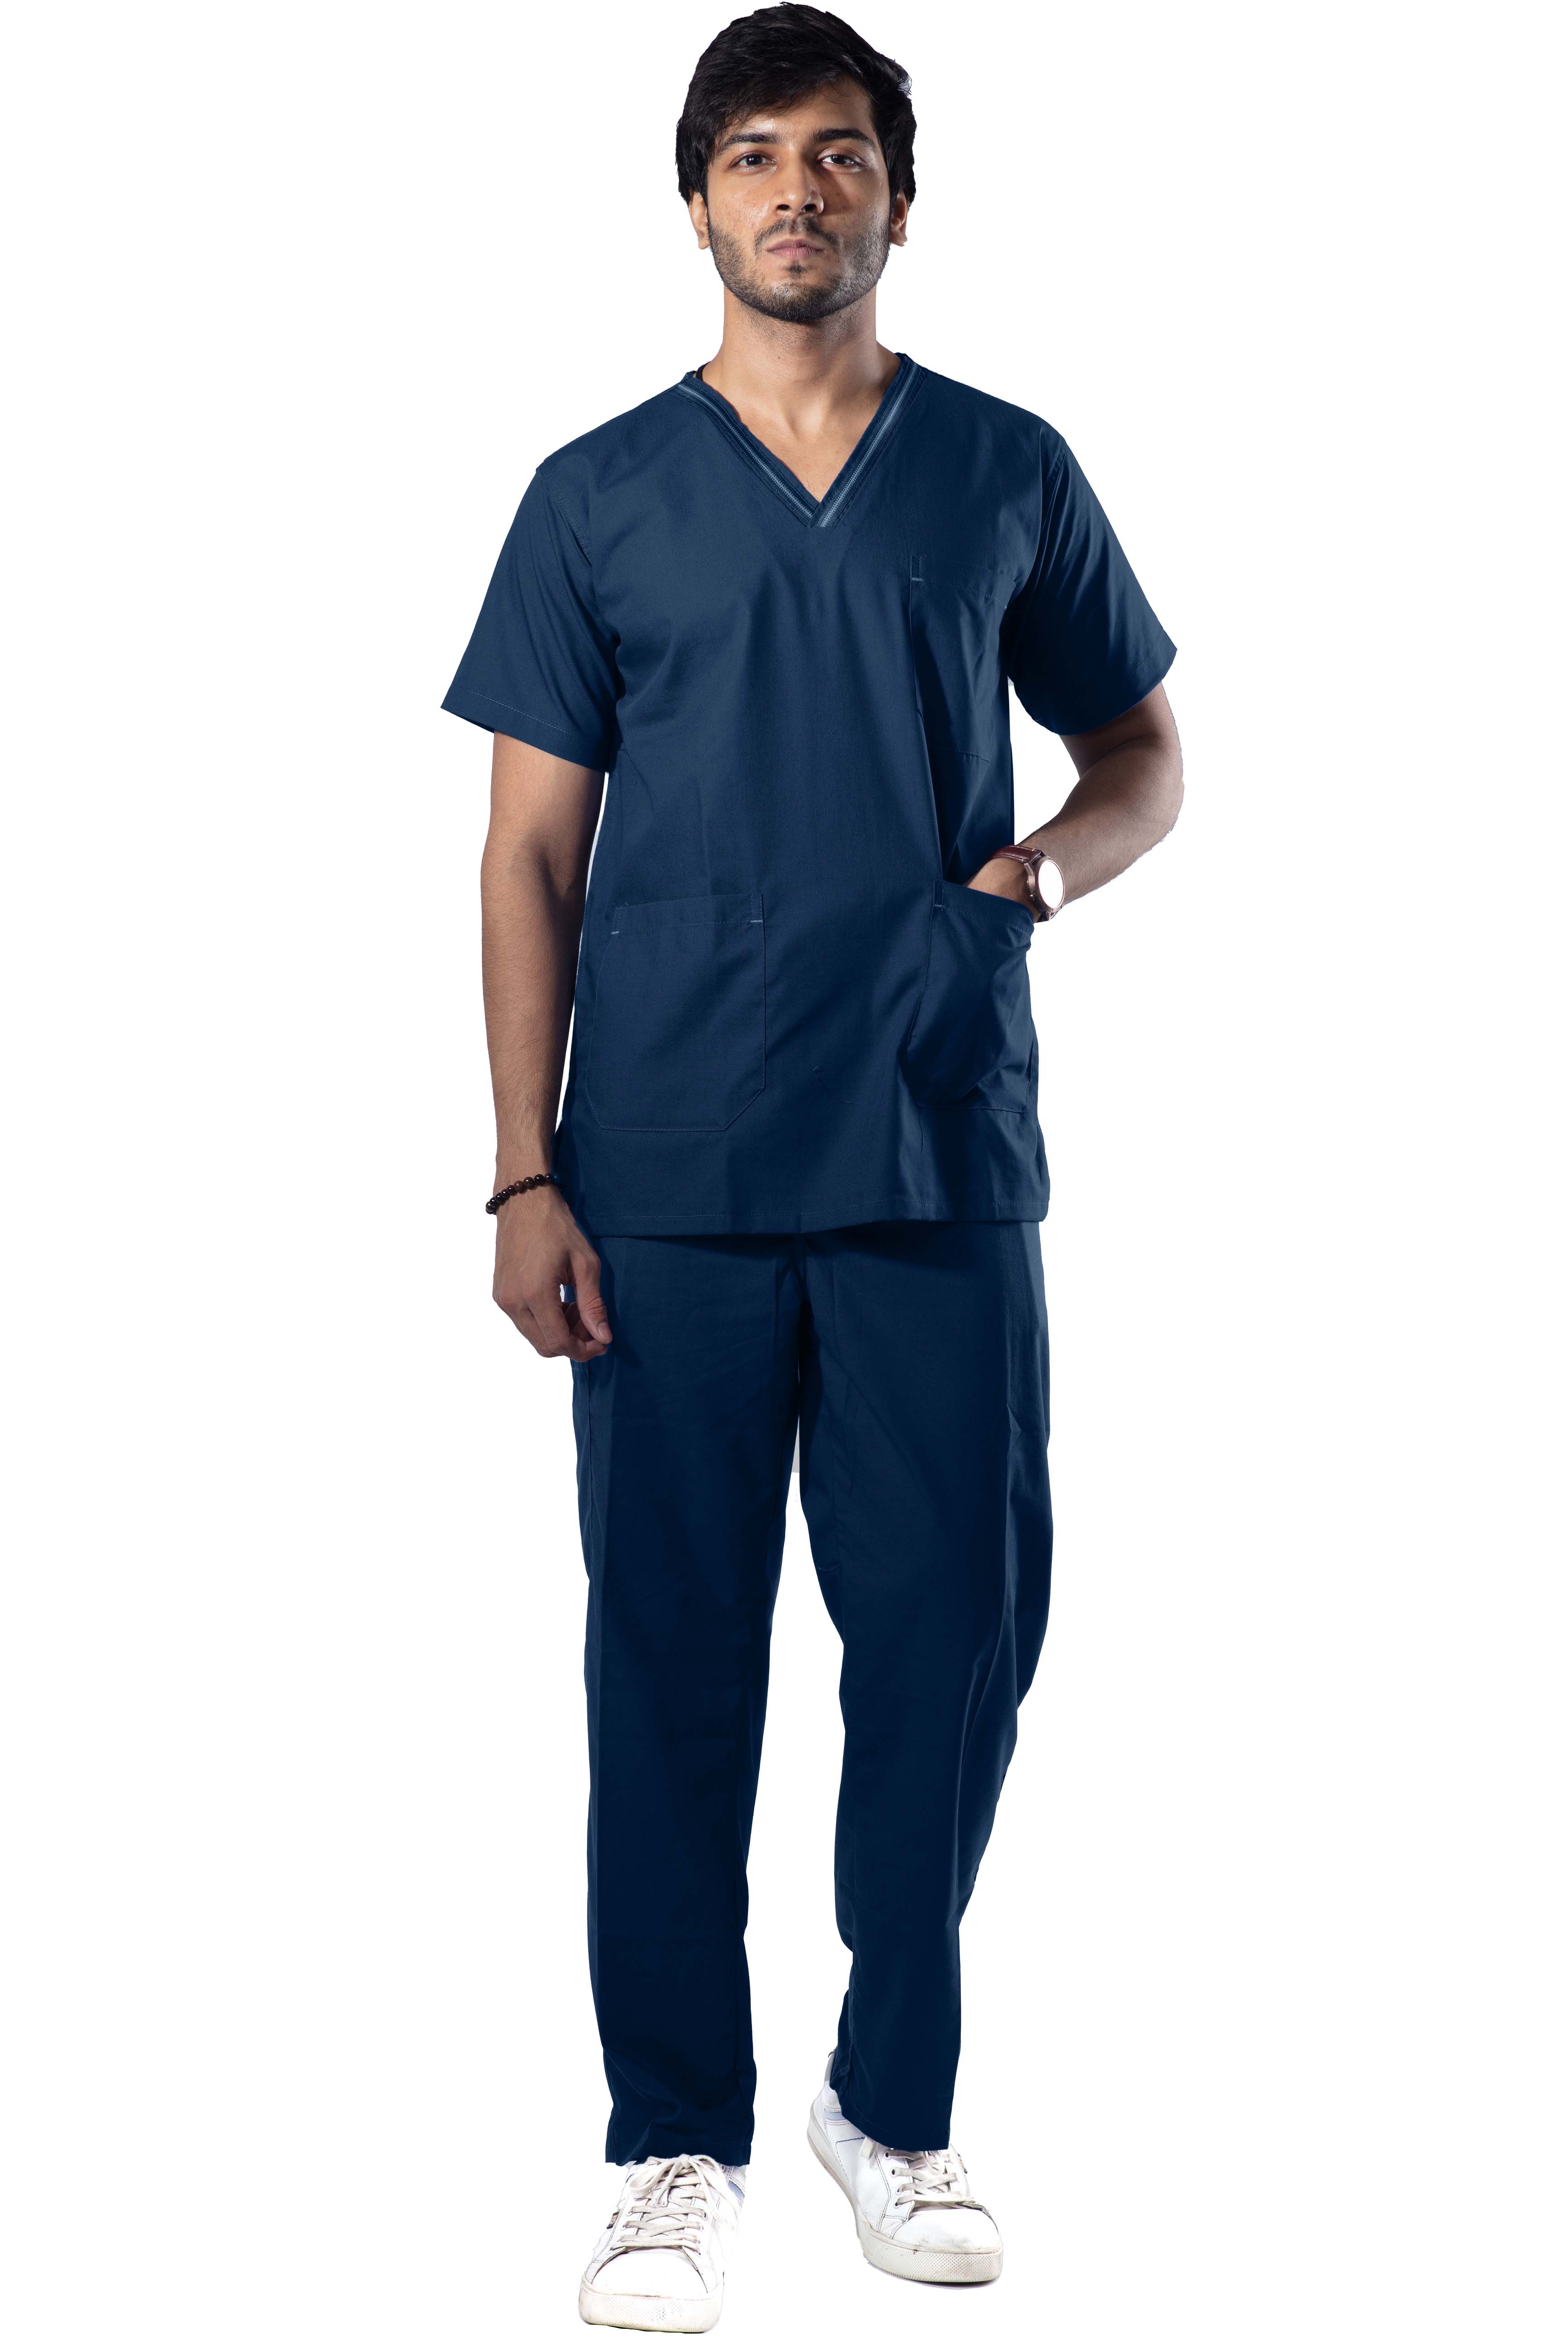 Light Green Surgical Scrubs Outfit | Plus Size Mens Doctor Costume